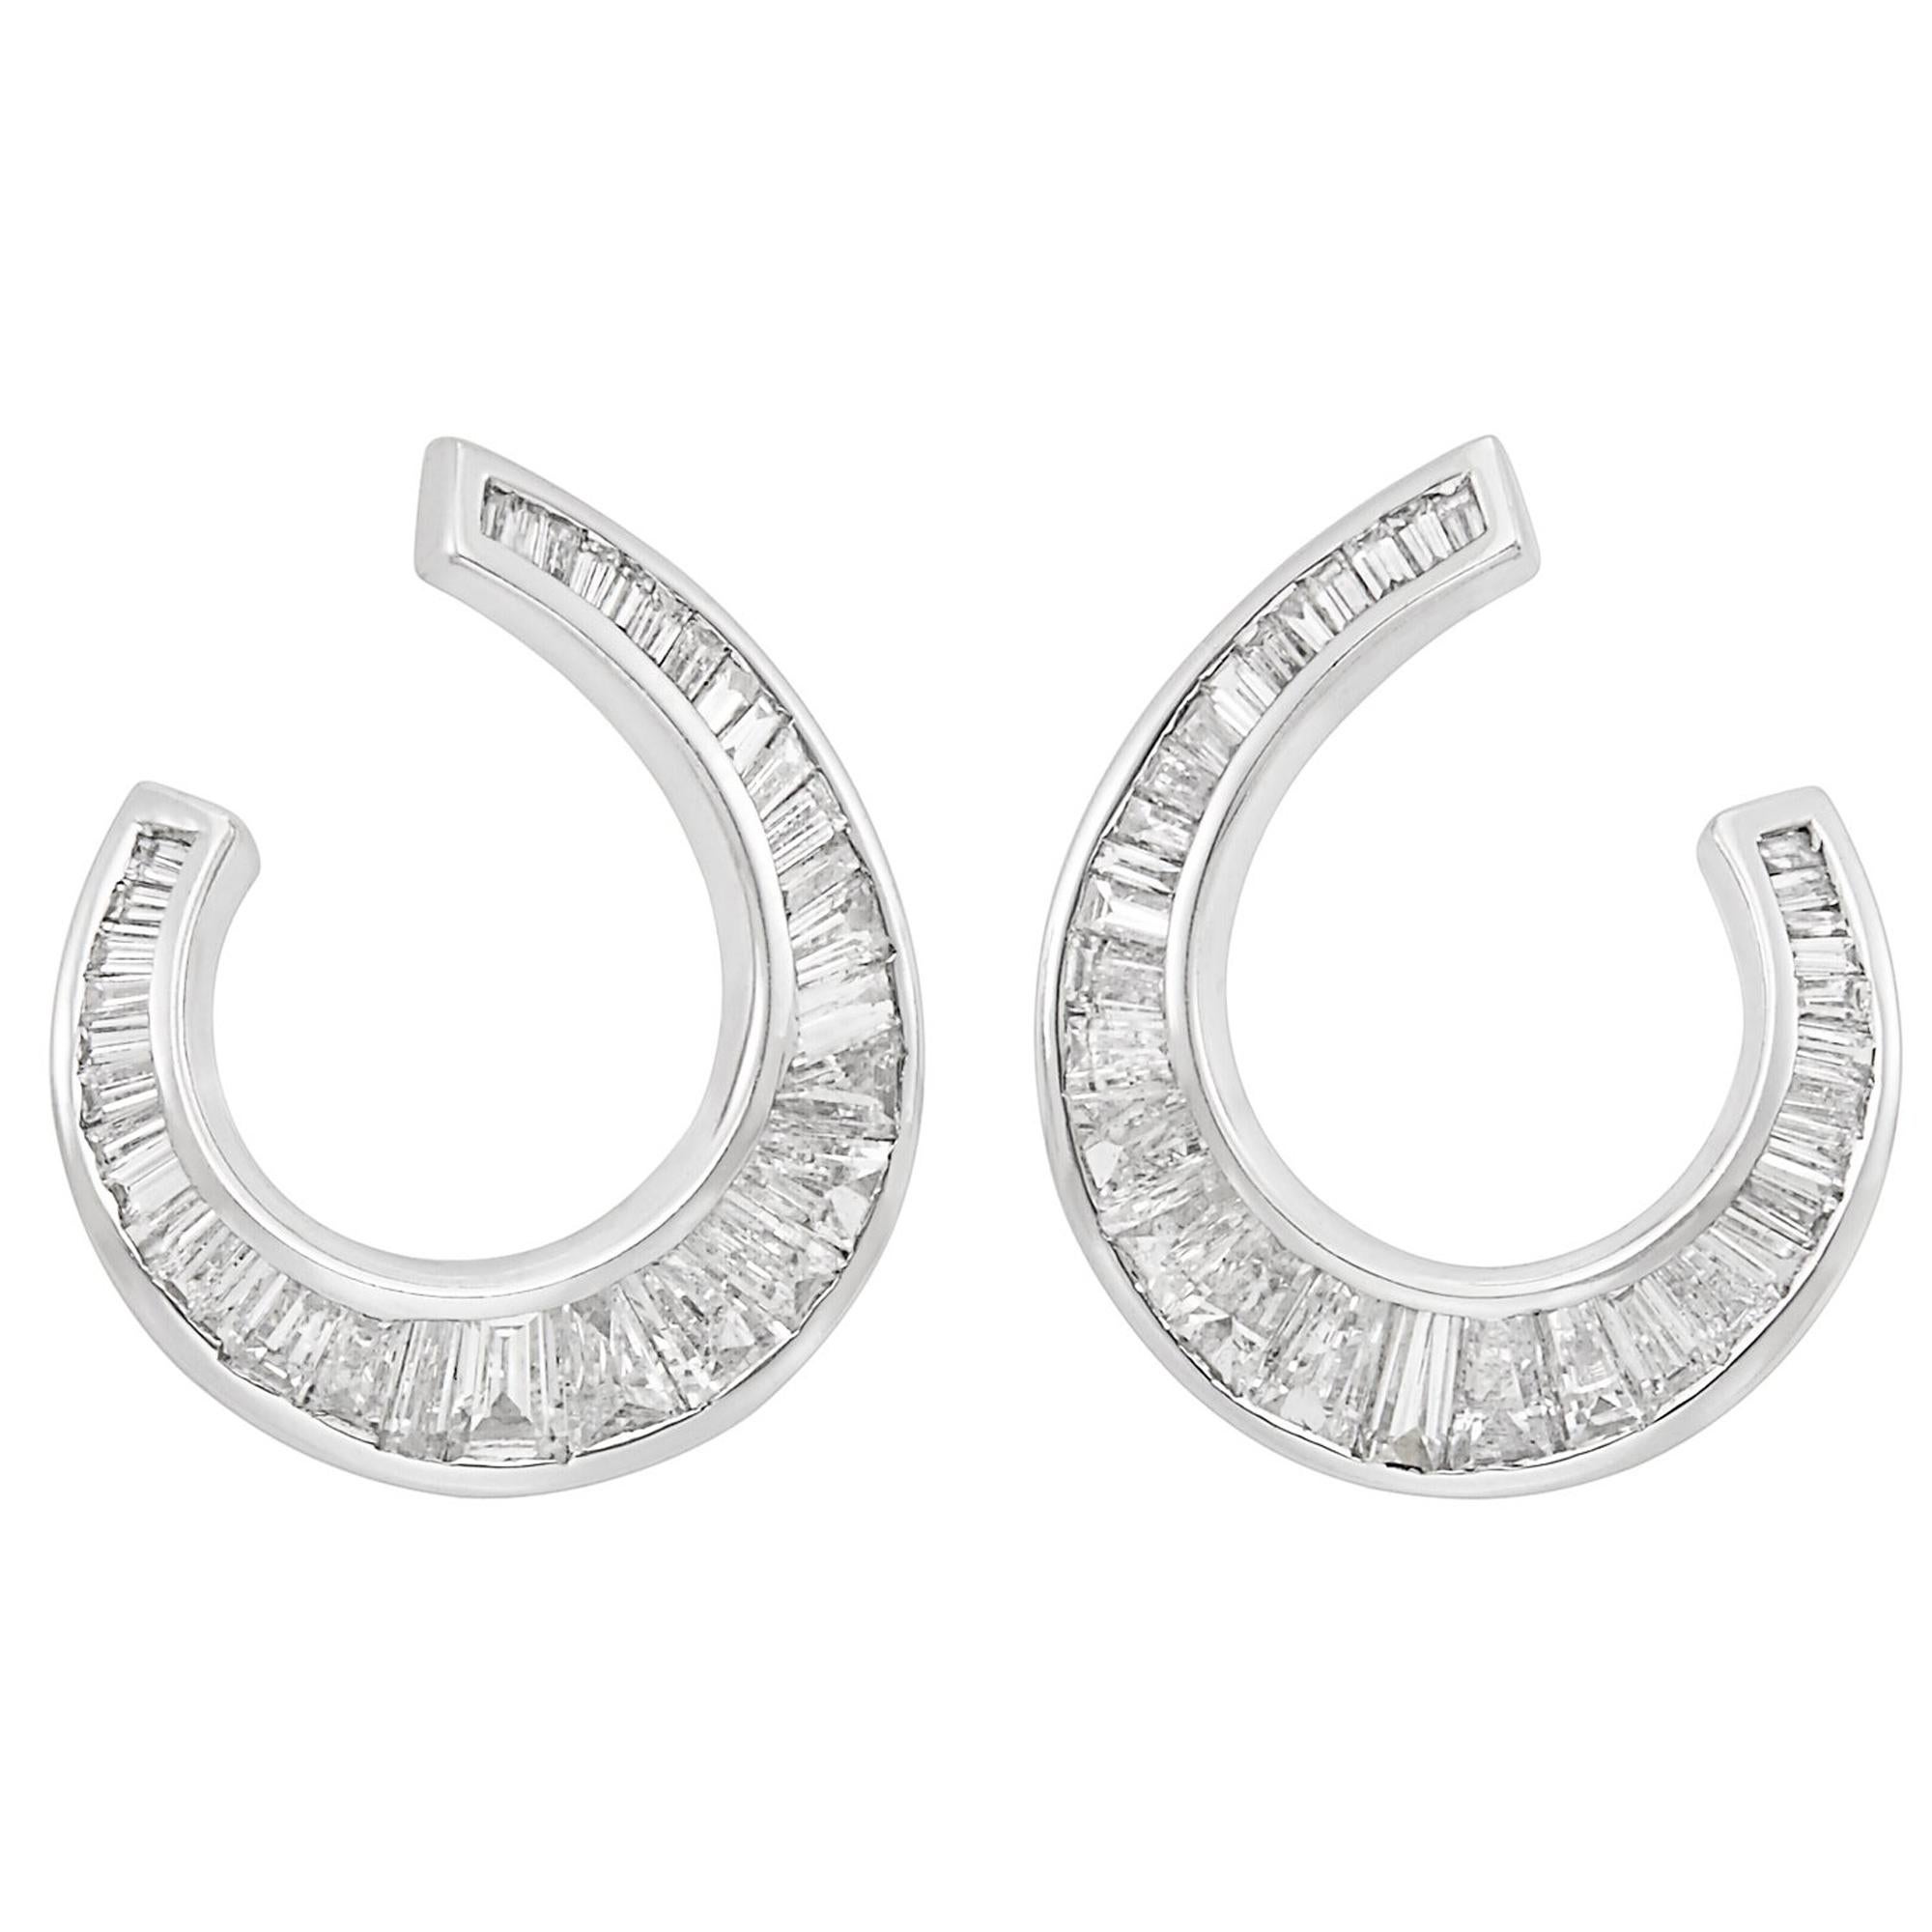 Pair of White Gold and Diamond Earrings 18 Kt, 66 Baguette Diamonds Ap. 2.25 Ct For Sale